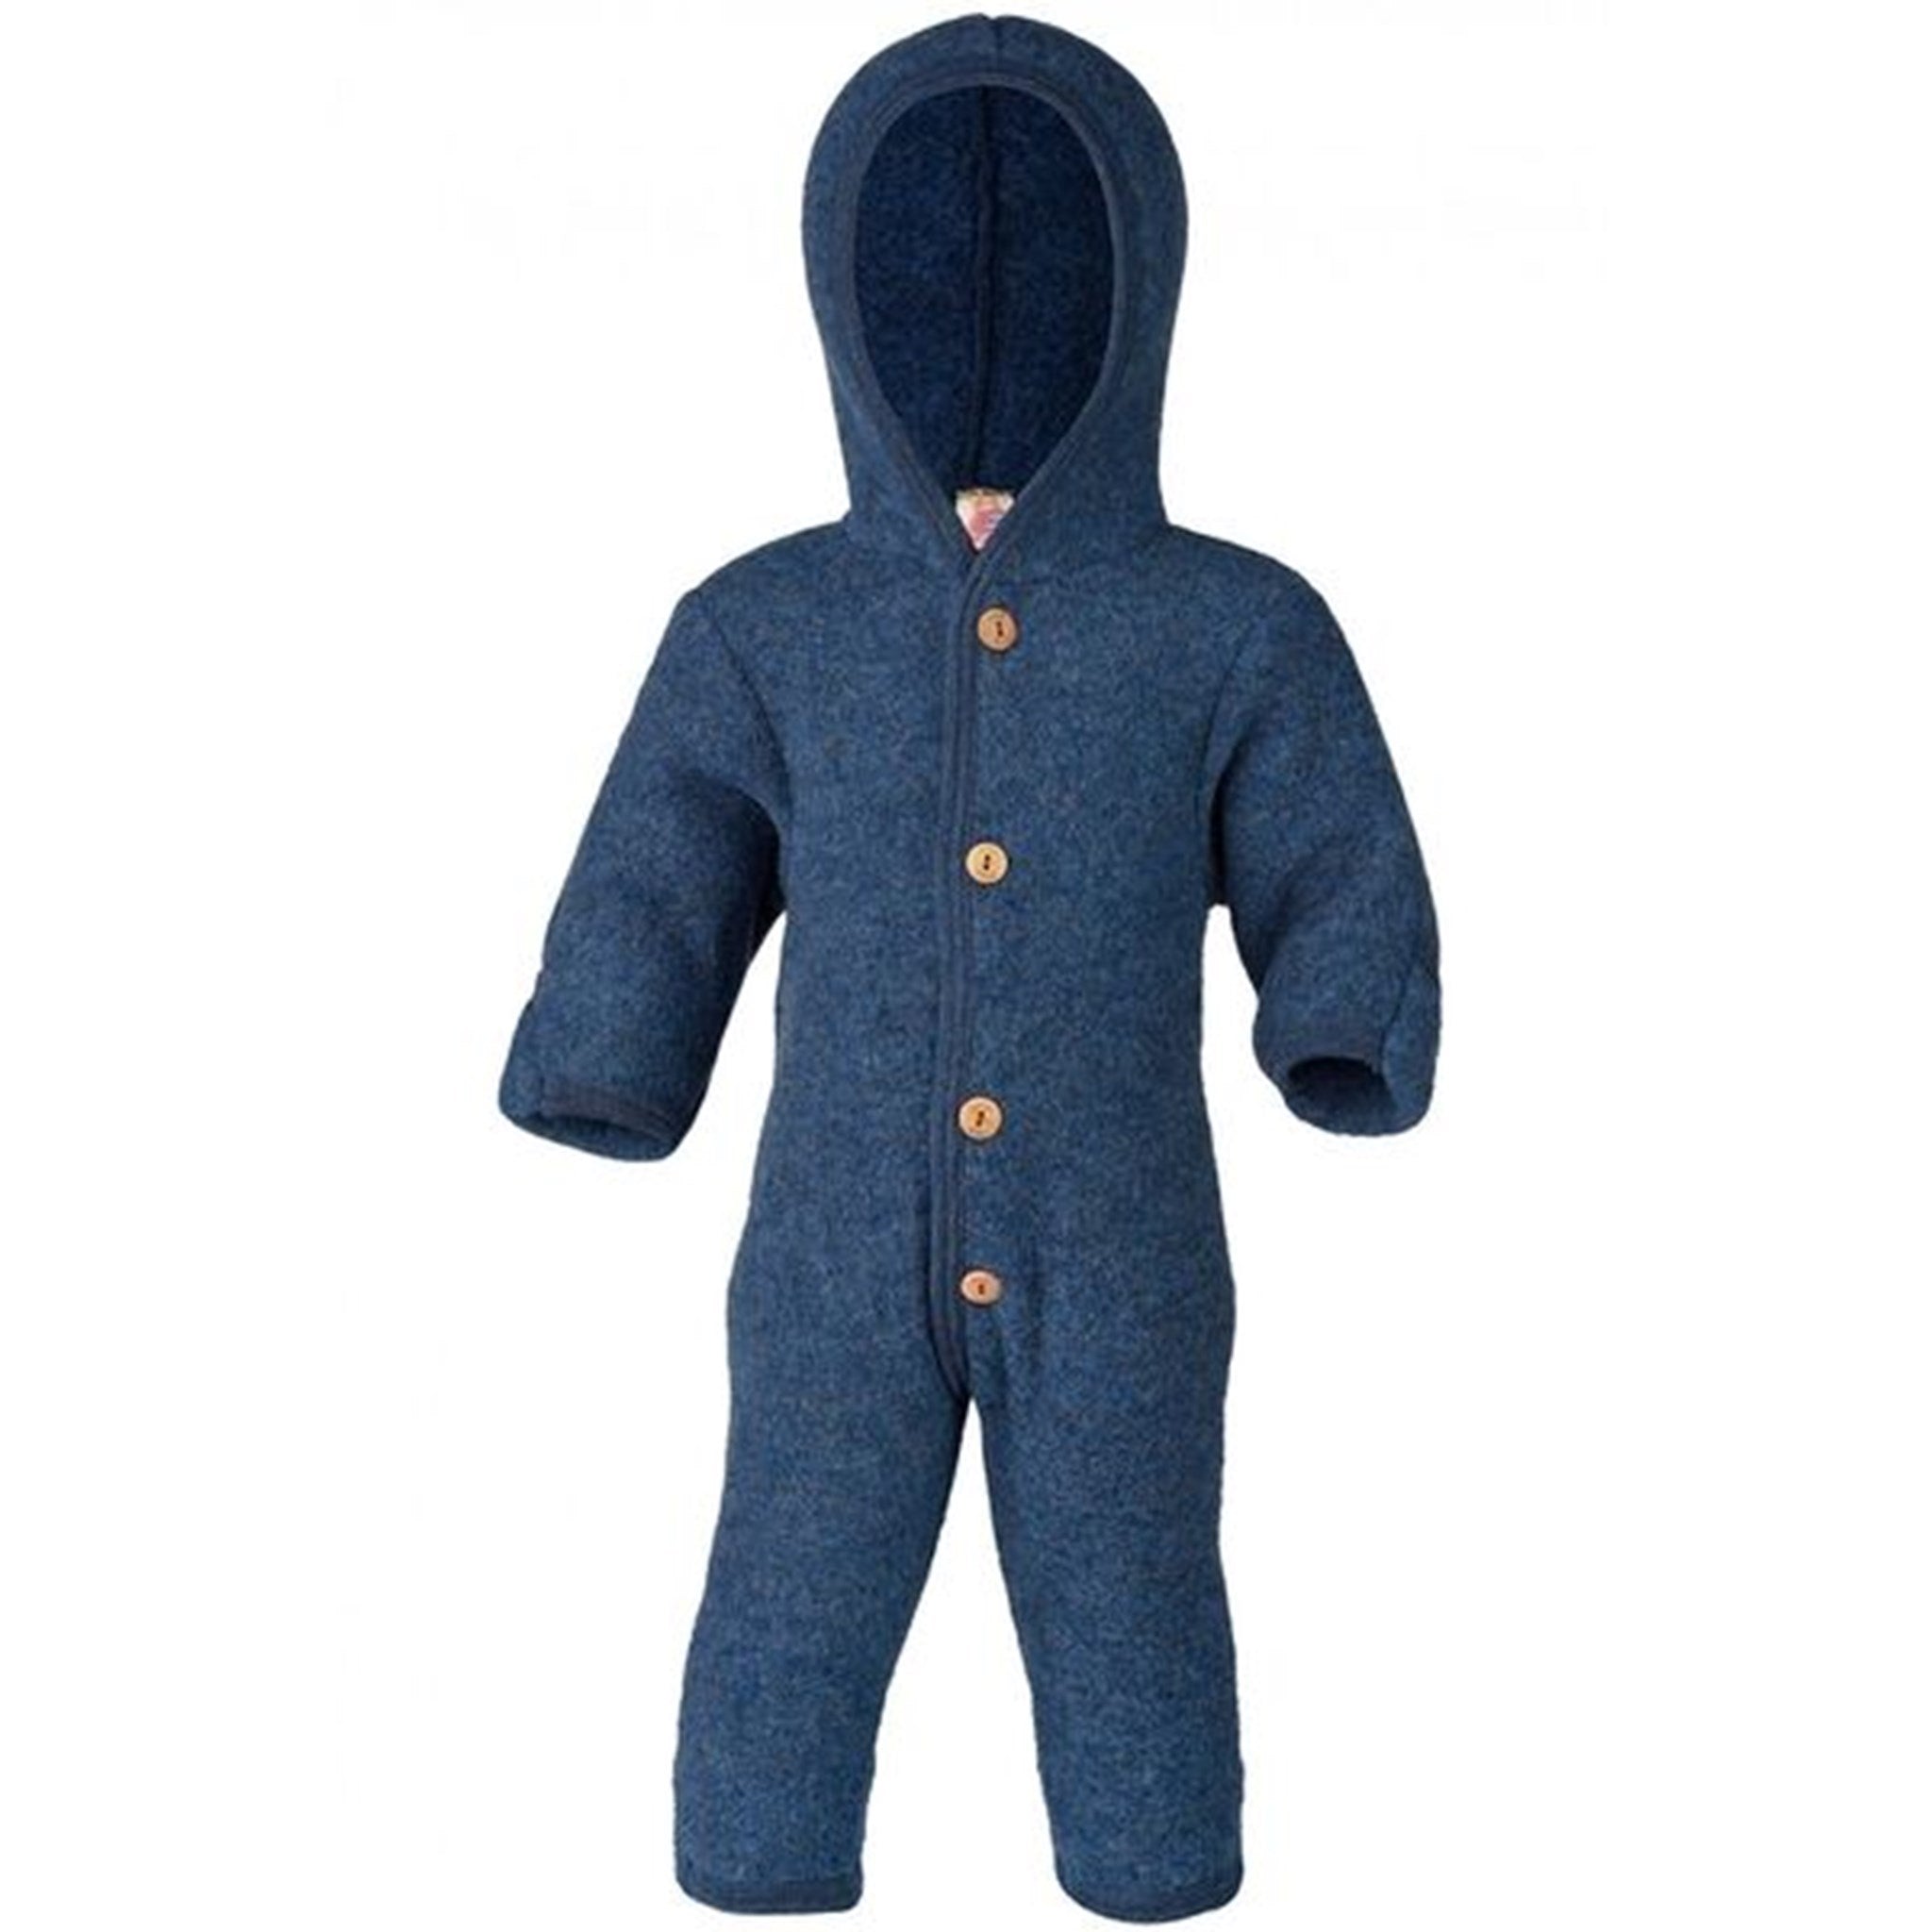 Engel Hooded Overall w. Buttons Blue Mélange